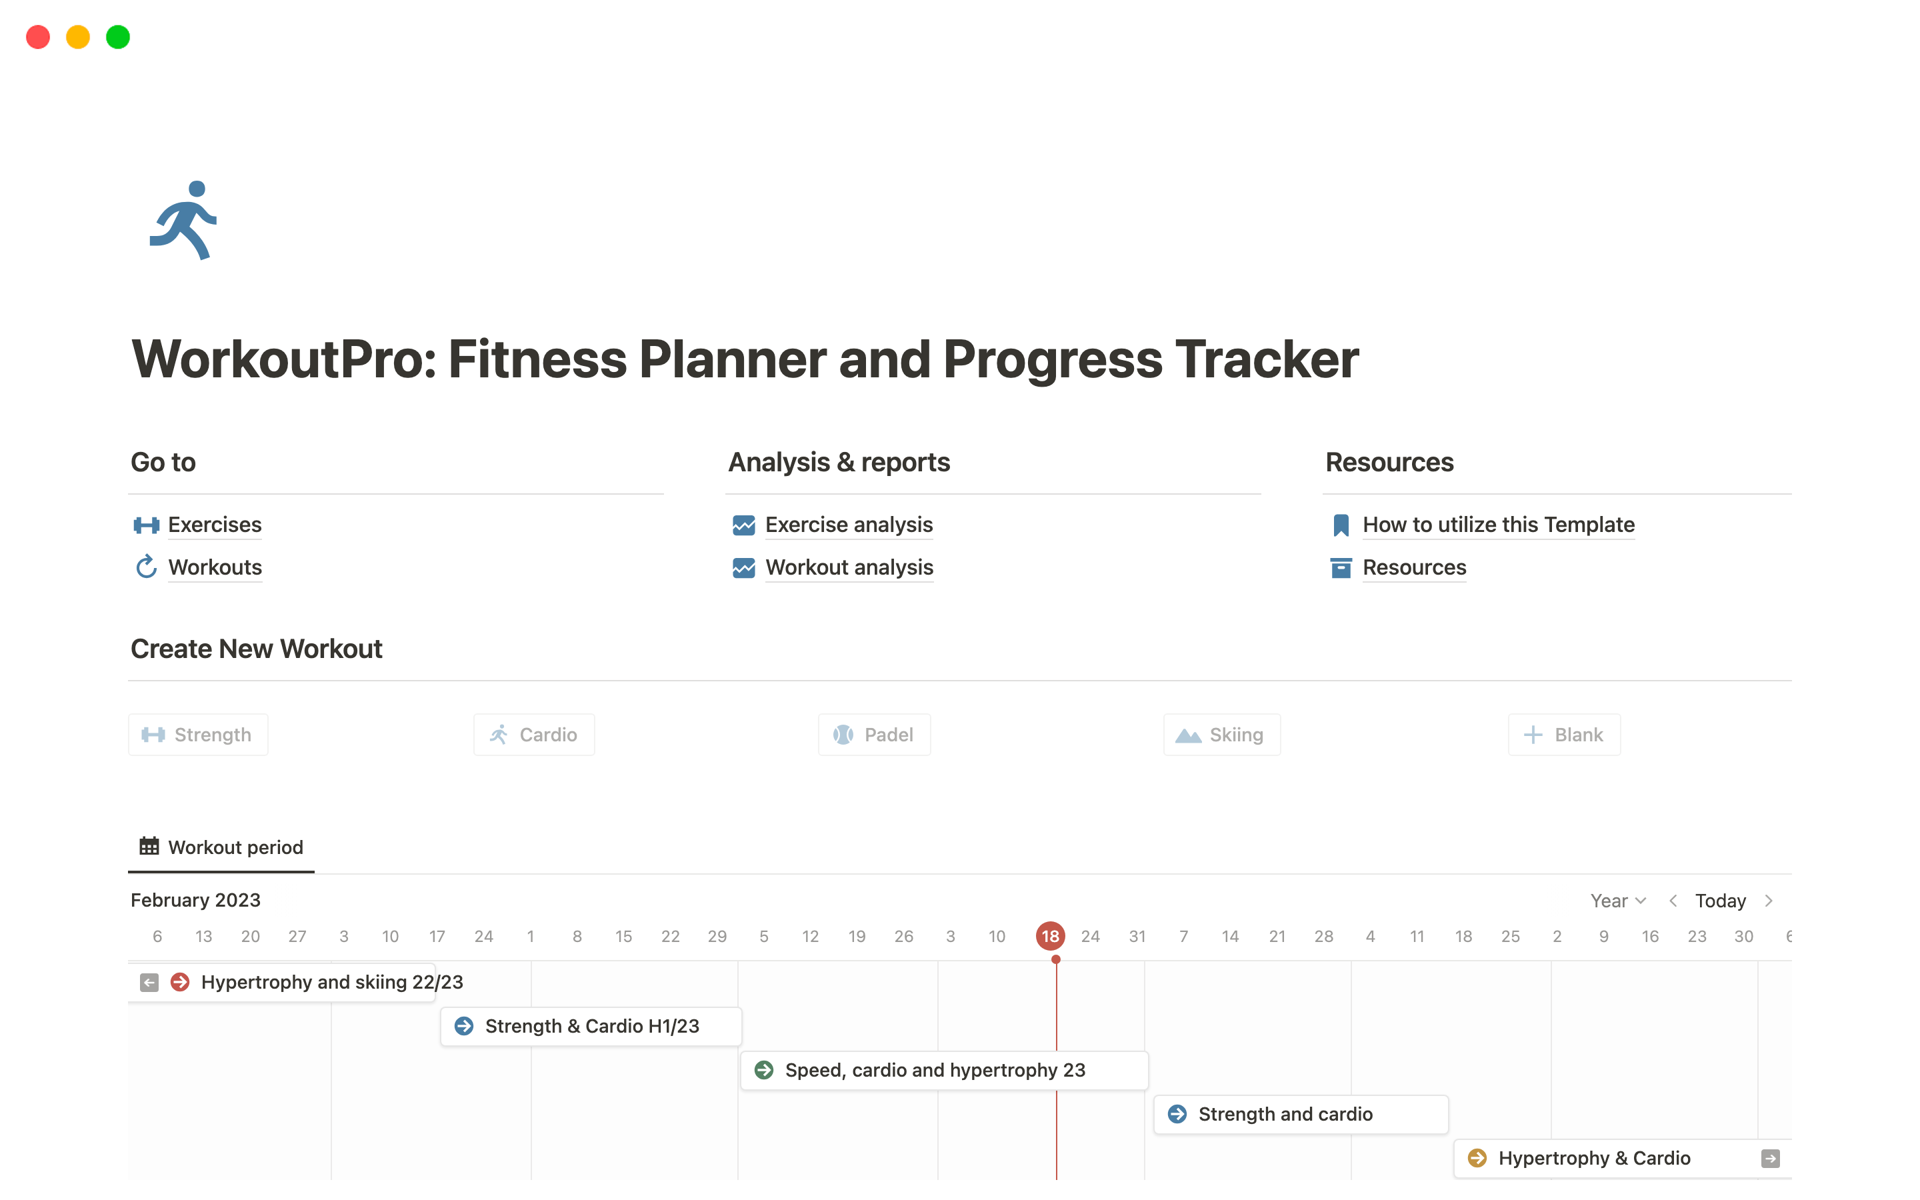 An advanced fitness planner and progress tracker for individuals at an intermediate or advanced level in their exercise regime seeking to introduce structure and optimizing their results. 